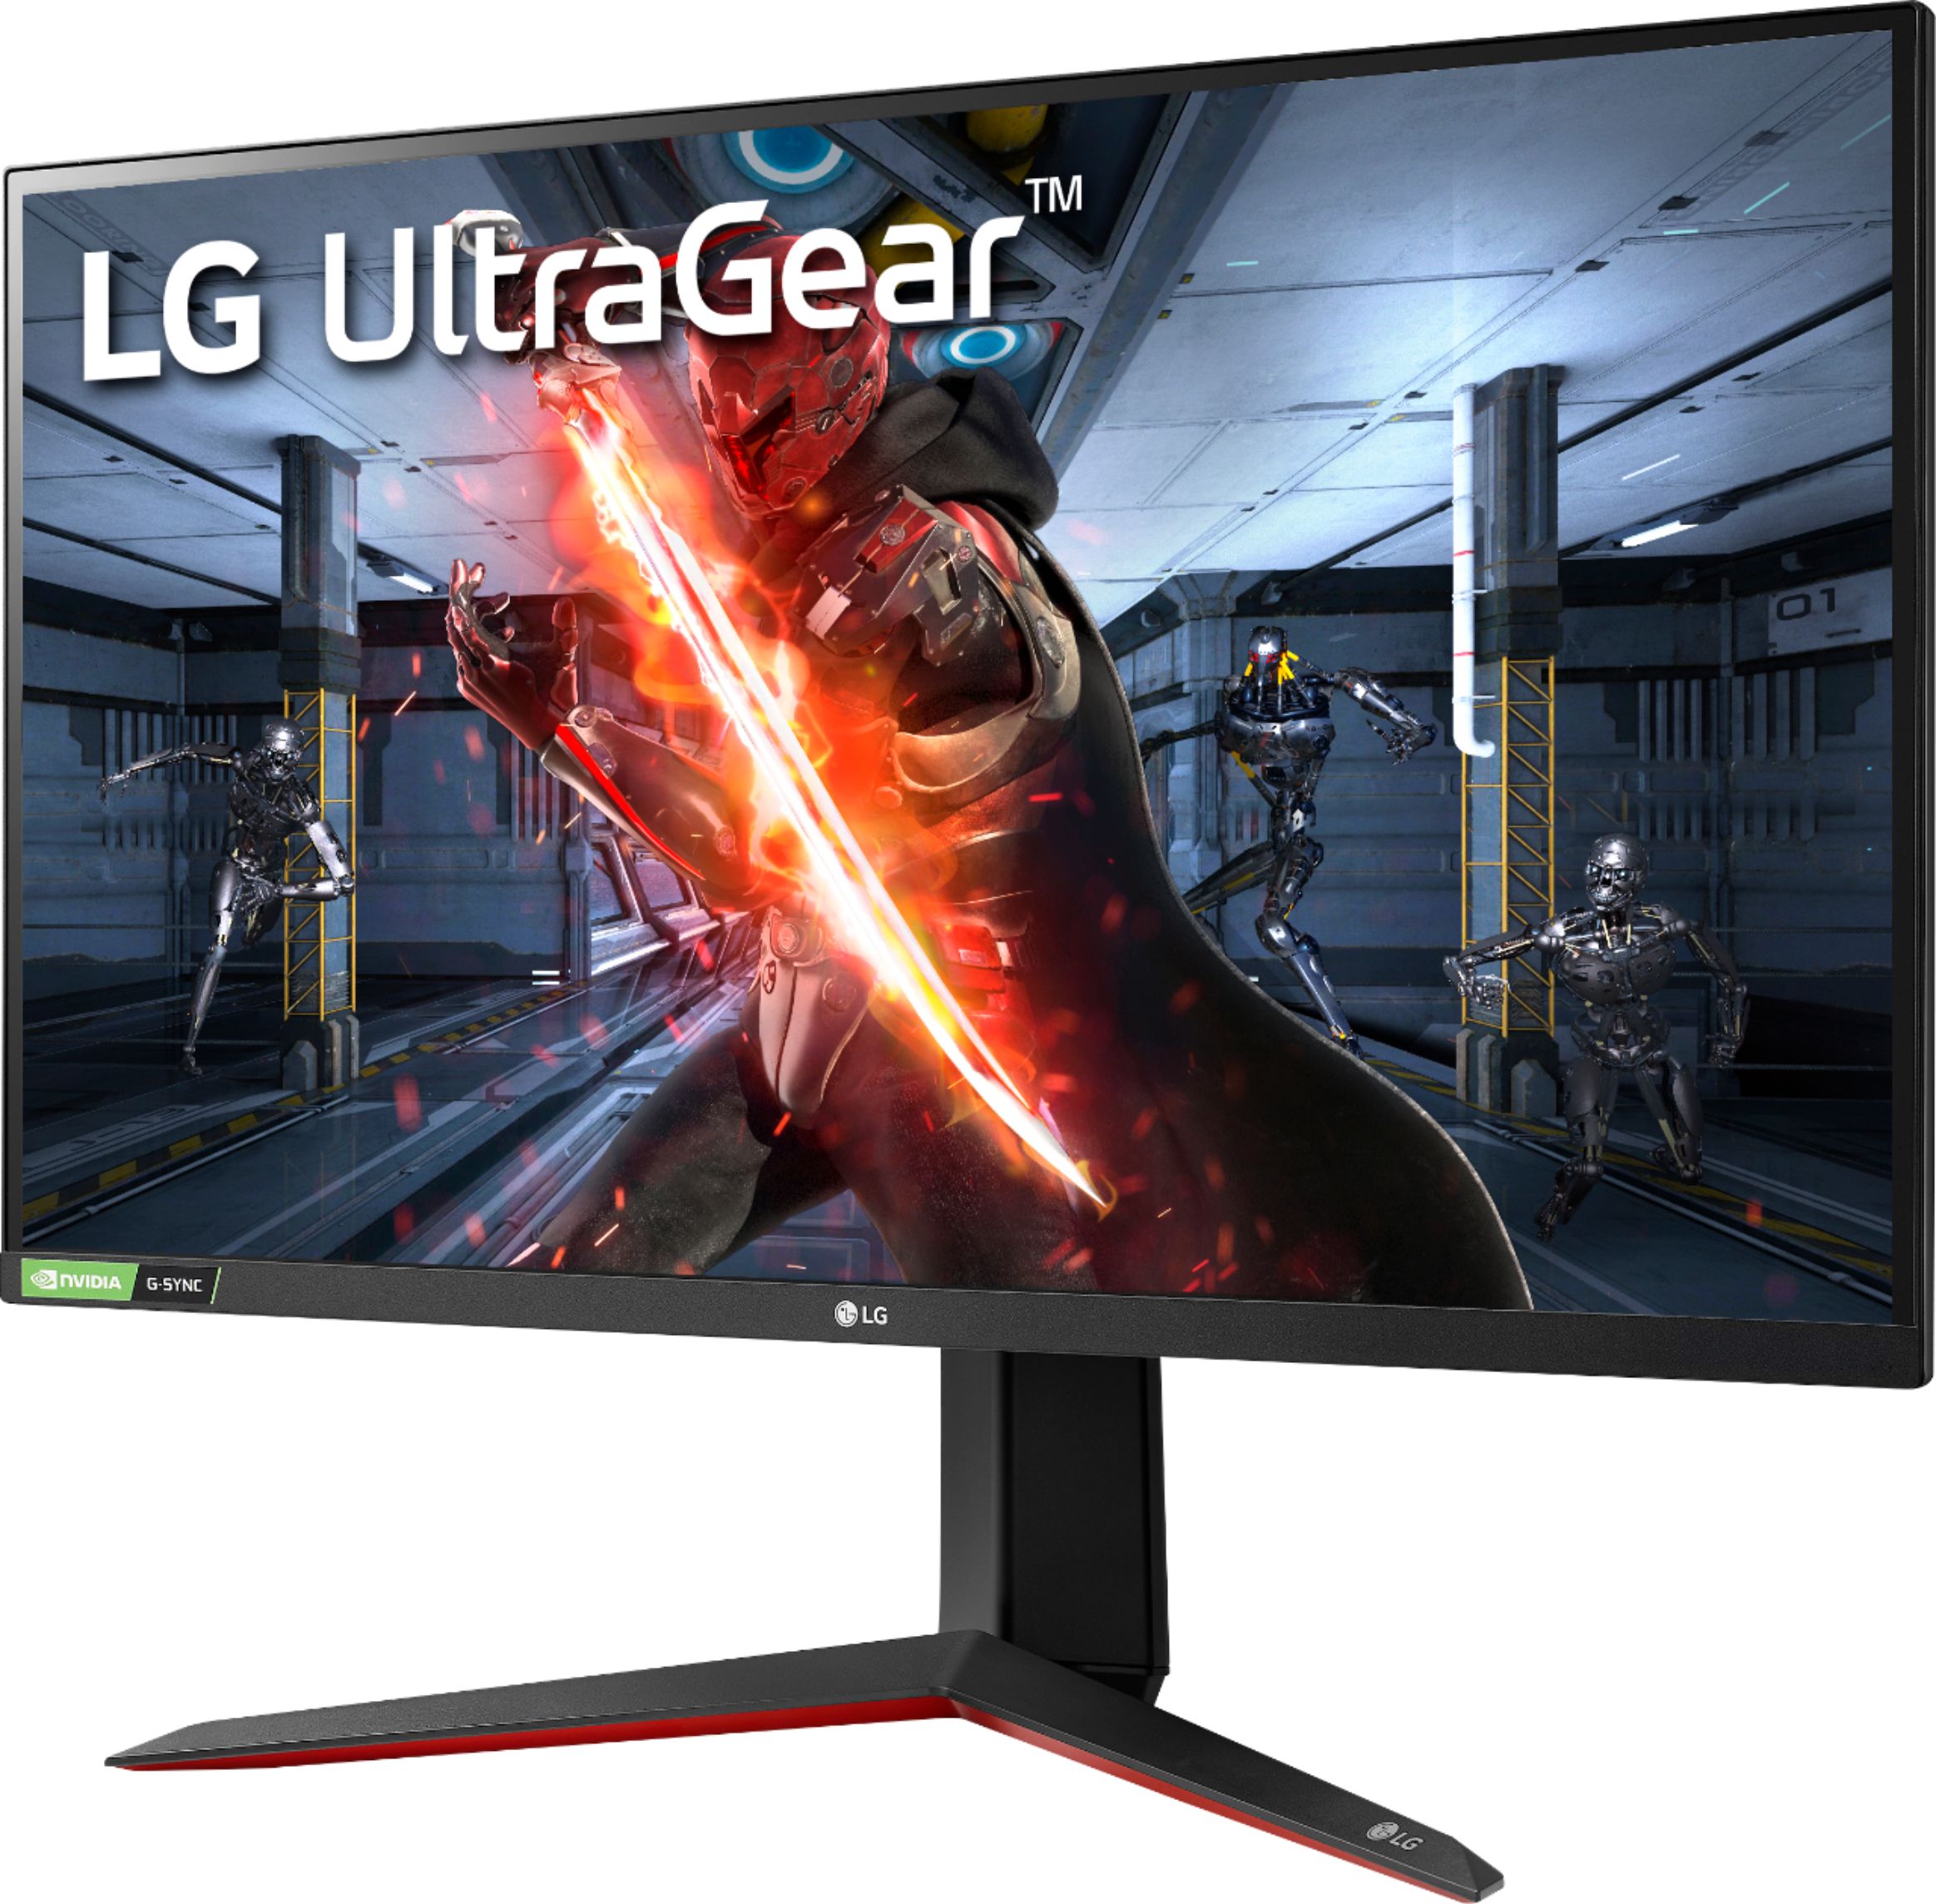 Left View: LG - Geek Squad Certified Refurbished UltraGear 27" IPS LED QHD FreeSync and G-SYNC Compatable Monitor with HDR - Black